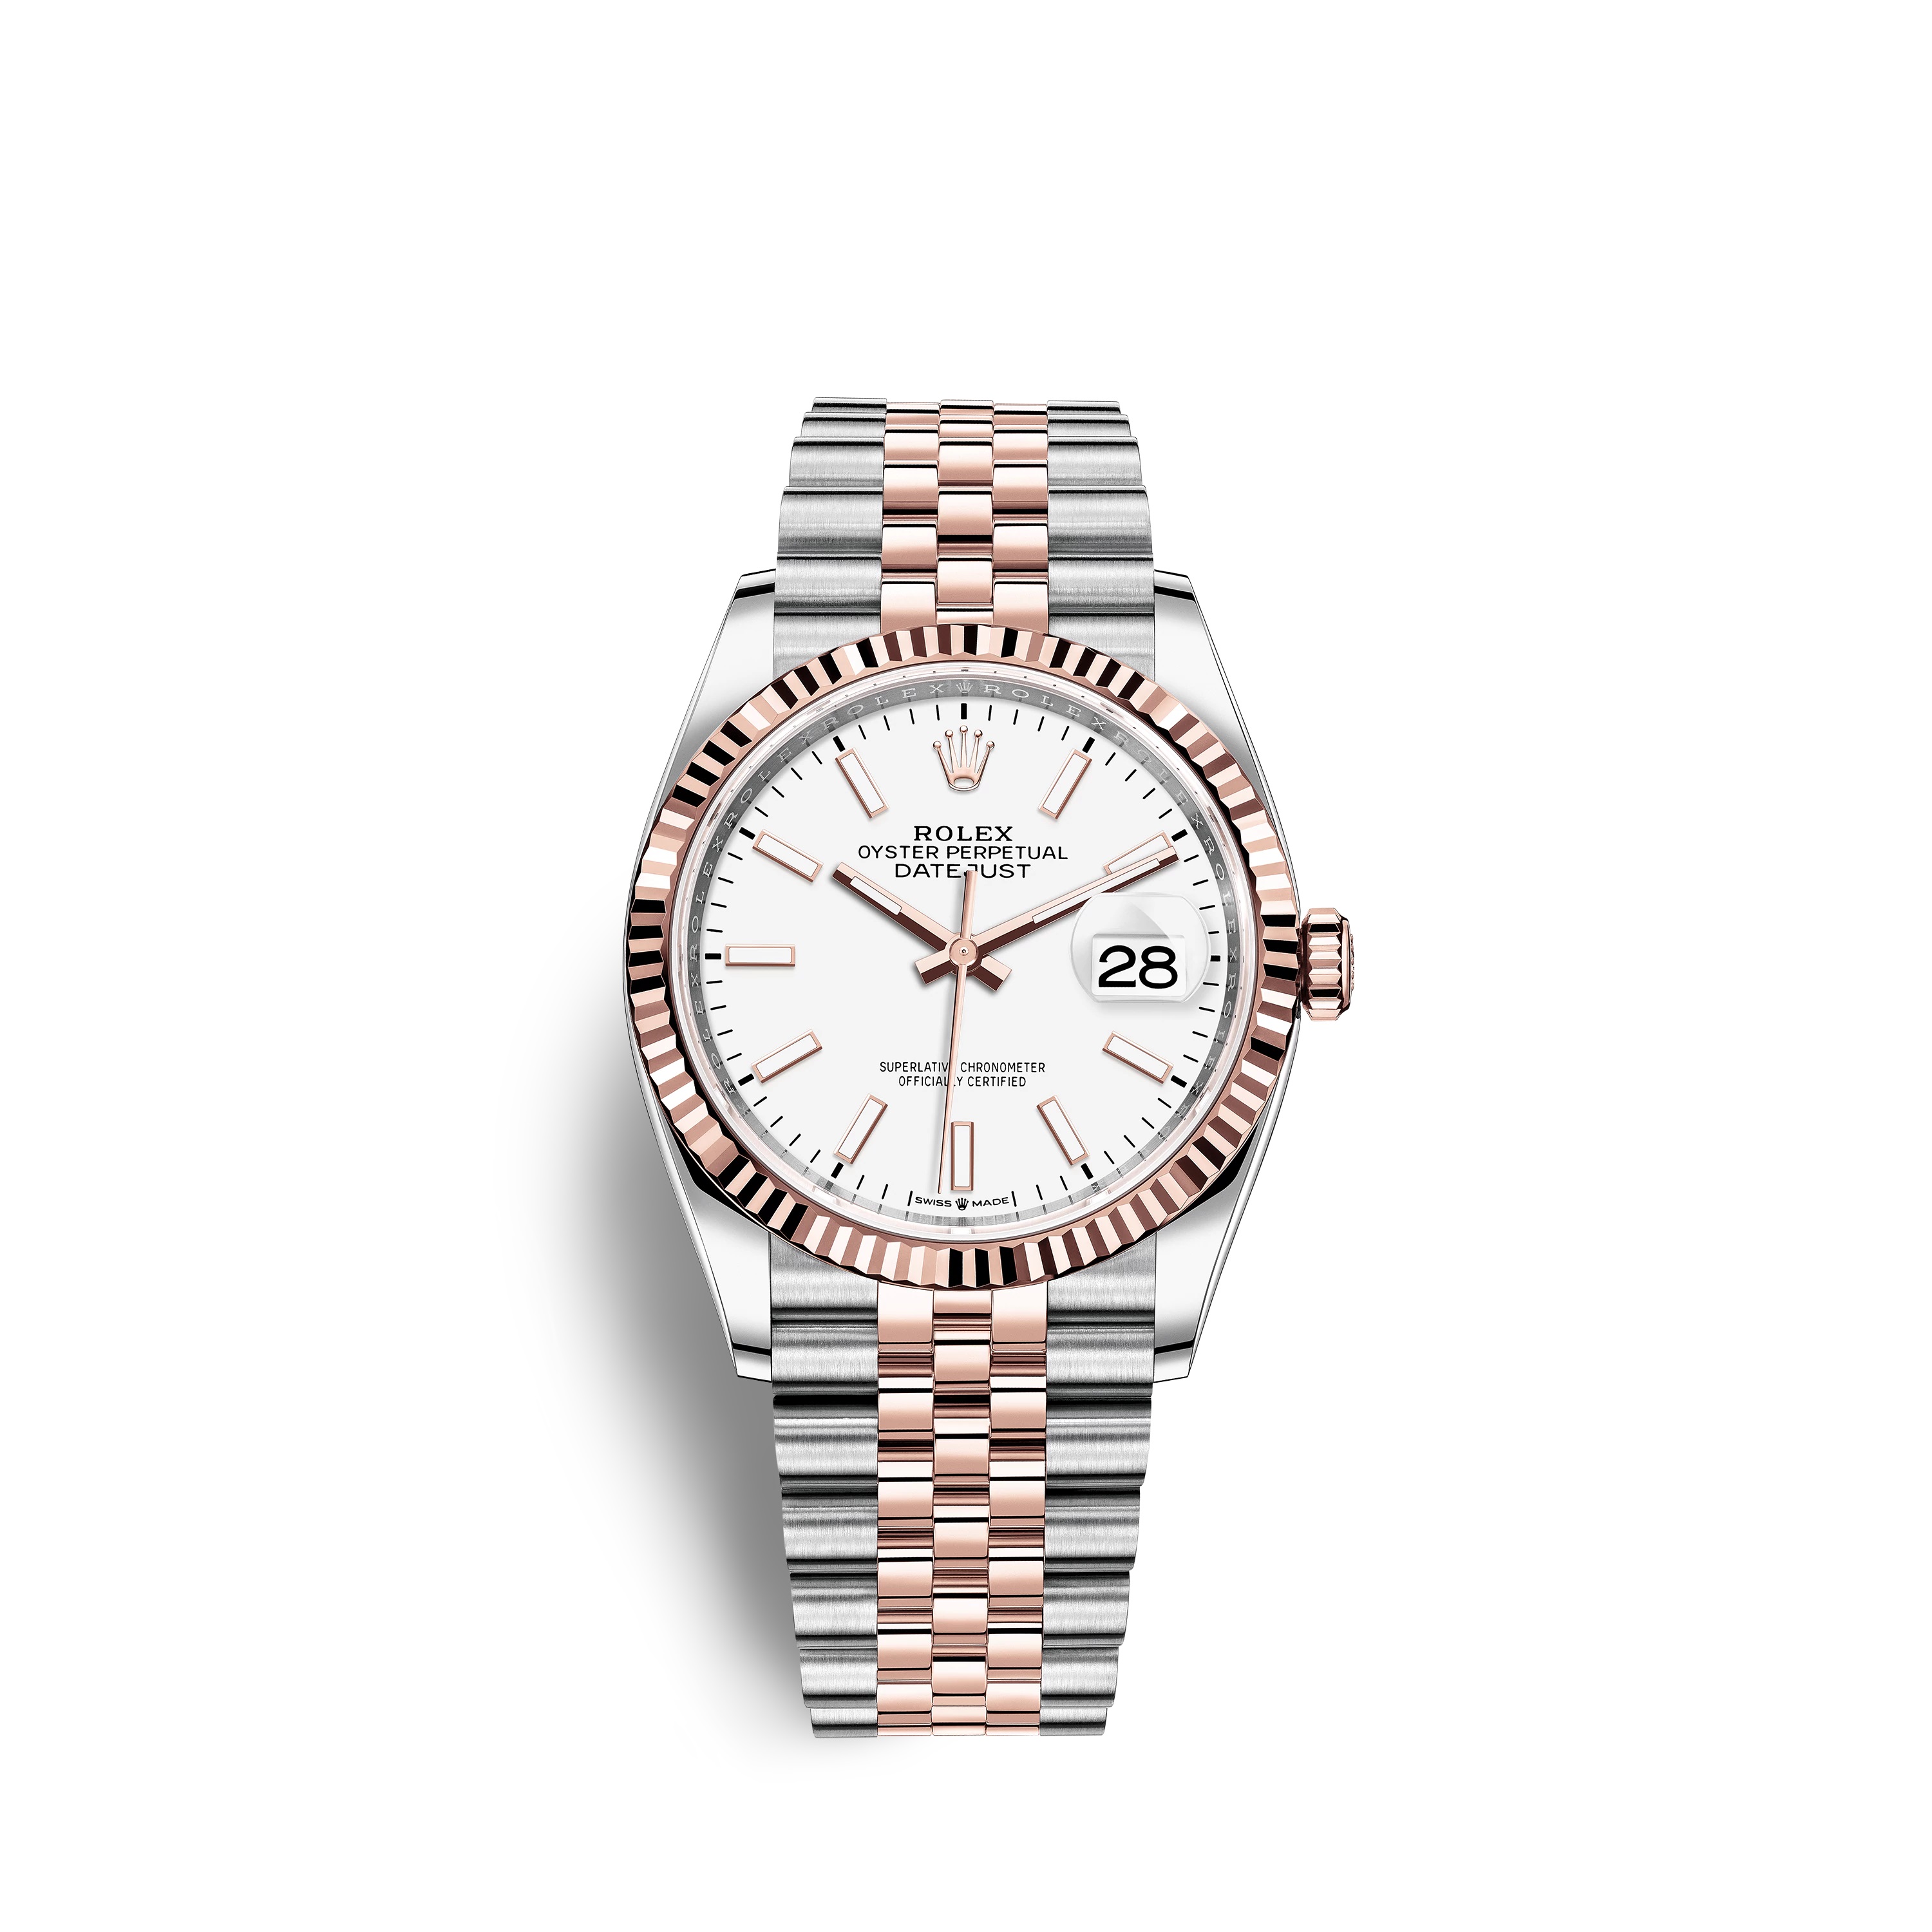 Datejust 36 126231 Rose Gold & Stainless Steel Watch (White)